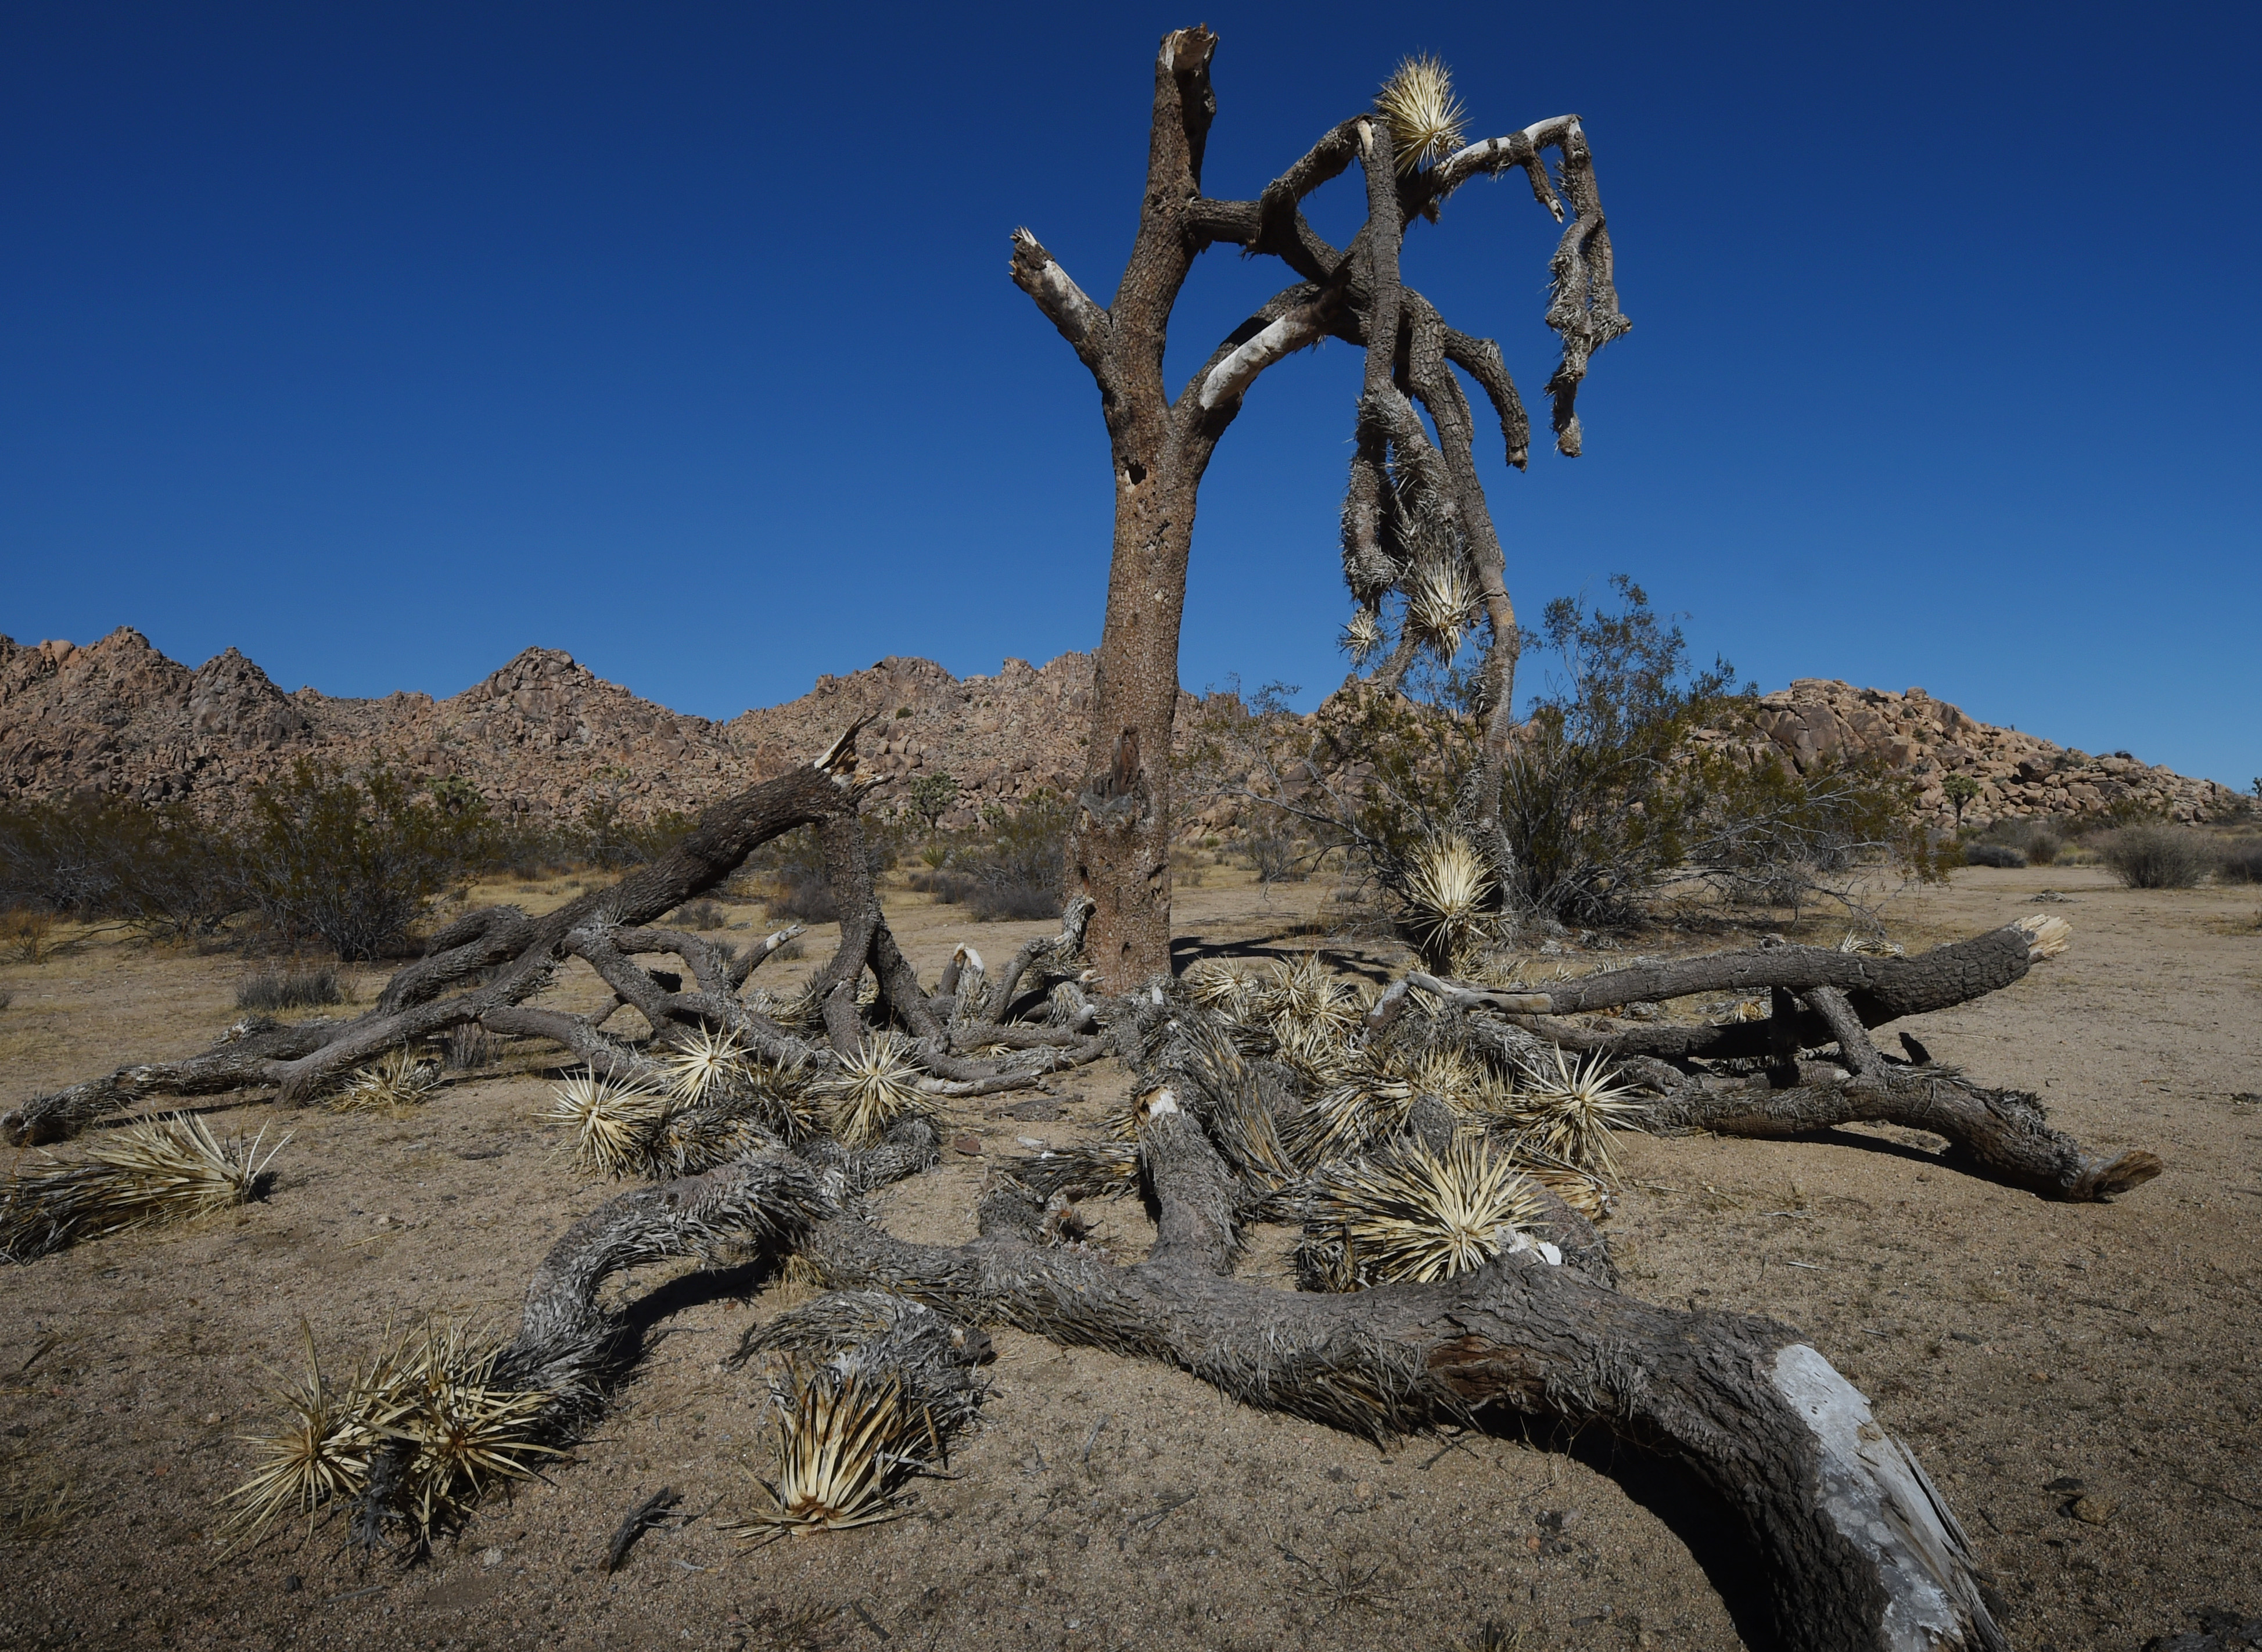 (FILES) This file photo taken on November 22, 2015 shows a dying Joshua Tree as the drought affects the state in Joshua Tree National Park, California. A warming planet might not dry out Earth as much as previously believed, because plants will become less thirsty as carbon dioxide in the atmosphere rises, researchers said on August 29, 2016. Previous studies have projected that more than 70 percent of the planet will experience more drought as carbon-dioxide levels quadruple from pre-industrial levels over about the next 100 years, said the report in the Proceedings of the National Academy of Sciences.  / AFP PHOTO / MARK RALSTON